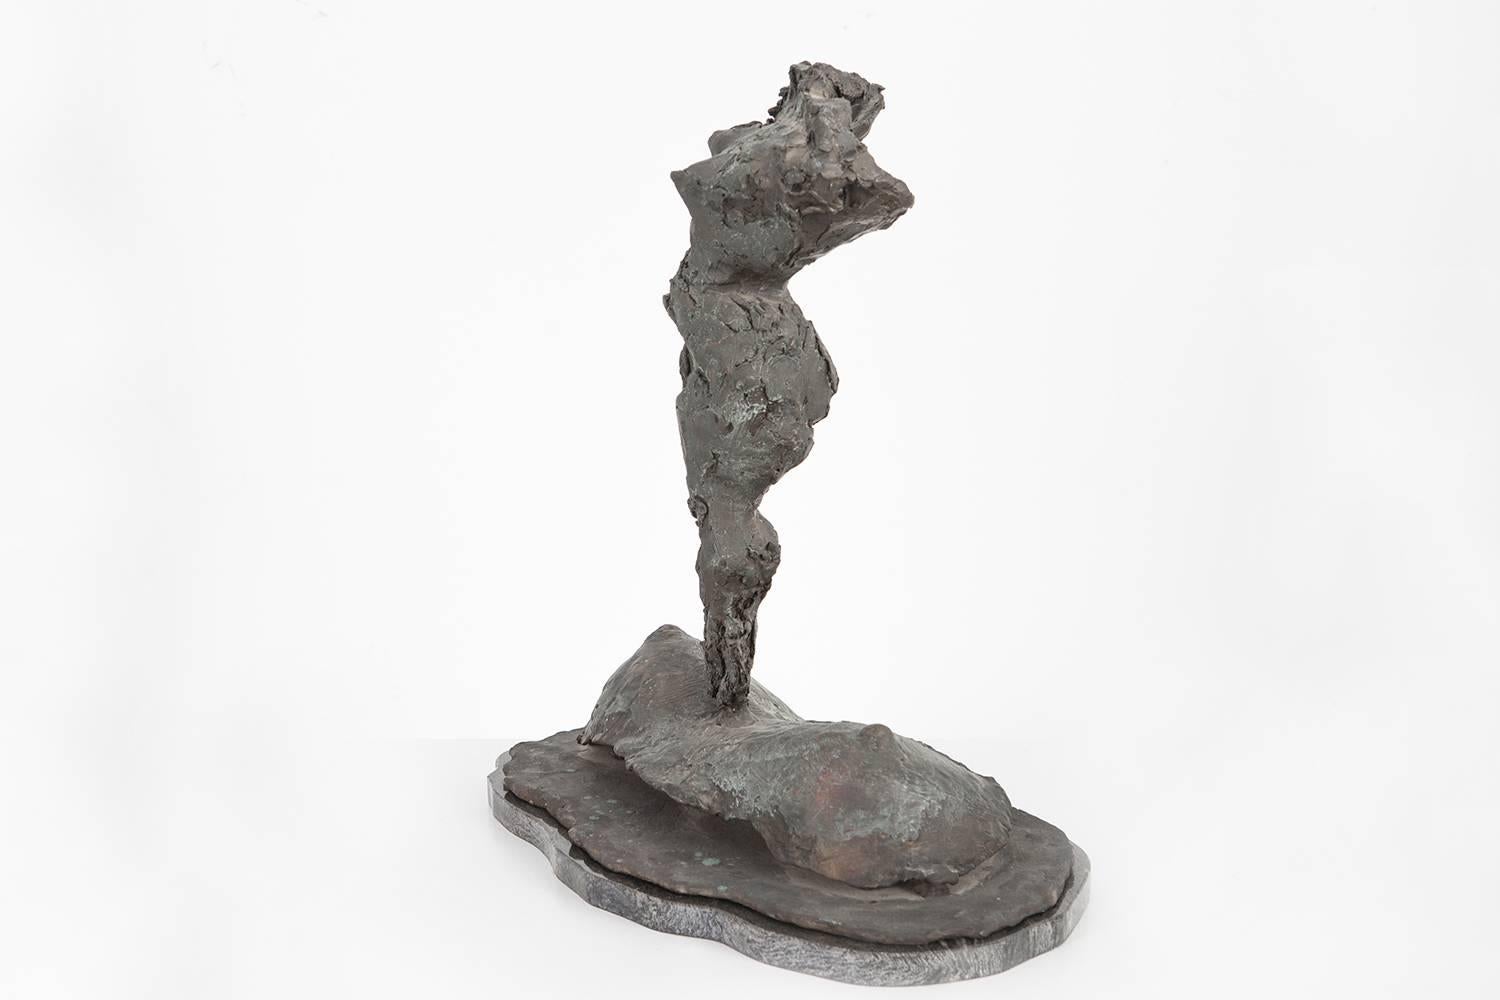 This sculpture by Ruth Aizuss Migdal depicts a vertical, nude figure on a solid base, both made of bronze. “Venus Rising” embodies feminine strength through the sturdiness of the bronze and curved shape and posture of the nude figure. 

Through a